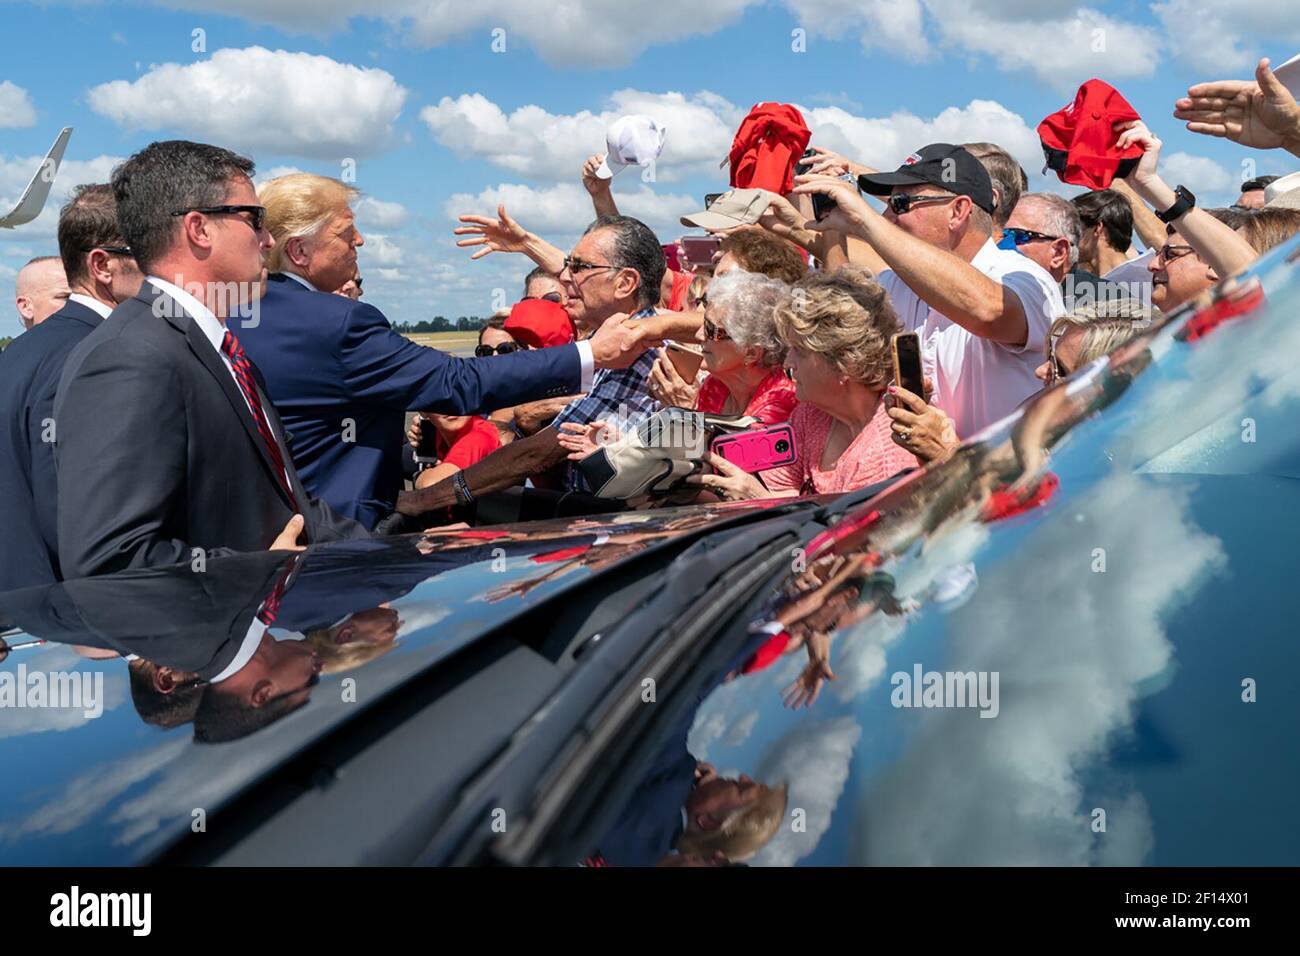 President Donald Trump shakes hands and poses for photos with supporters Thursday Oct. 3 2019 upon his arrival to Ocala International Airport in Ocala Fla. en route to visit The Villages FL. Stock Photo